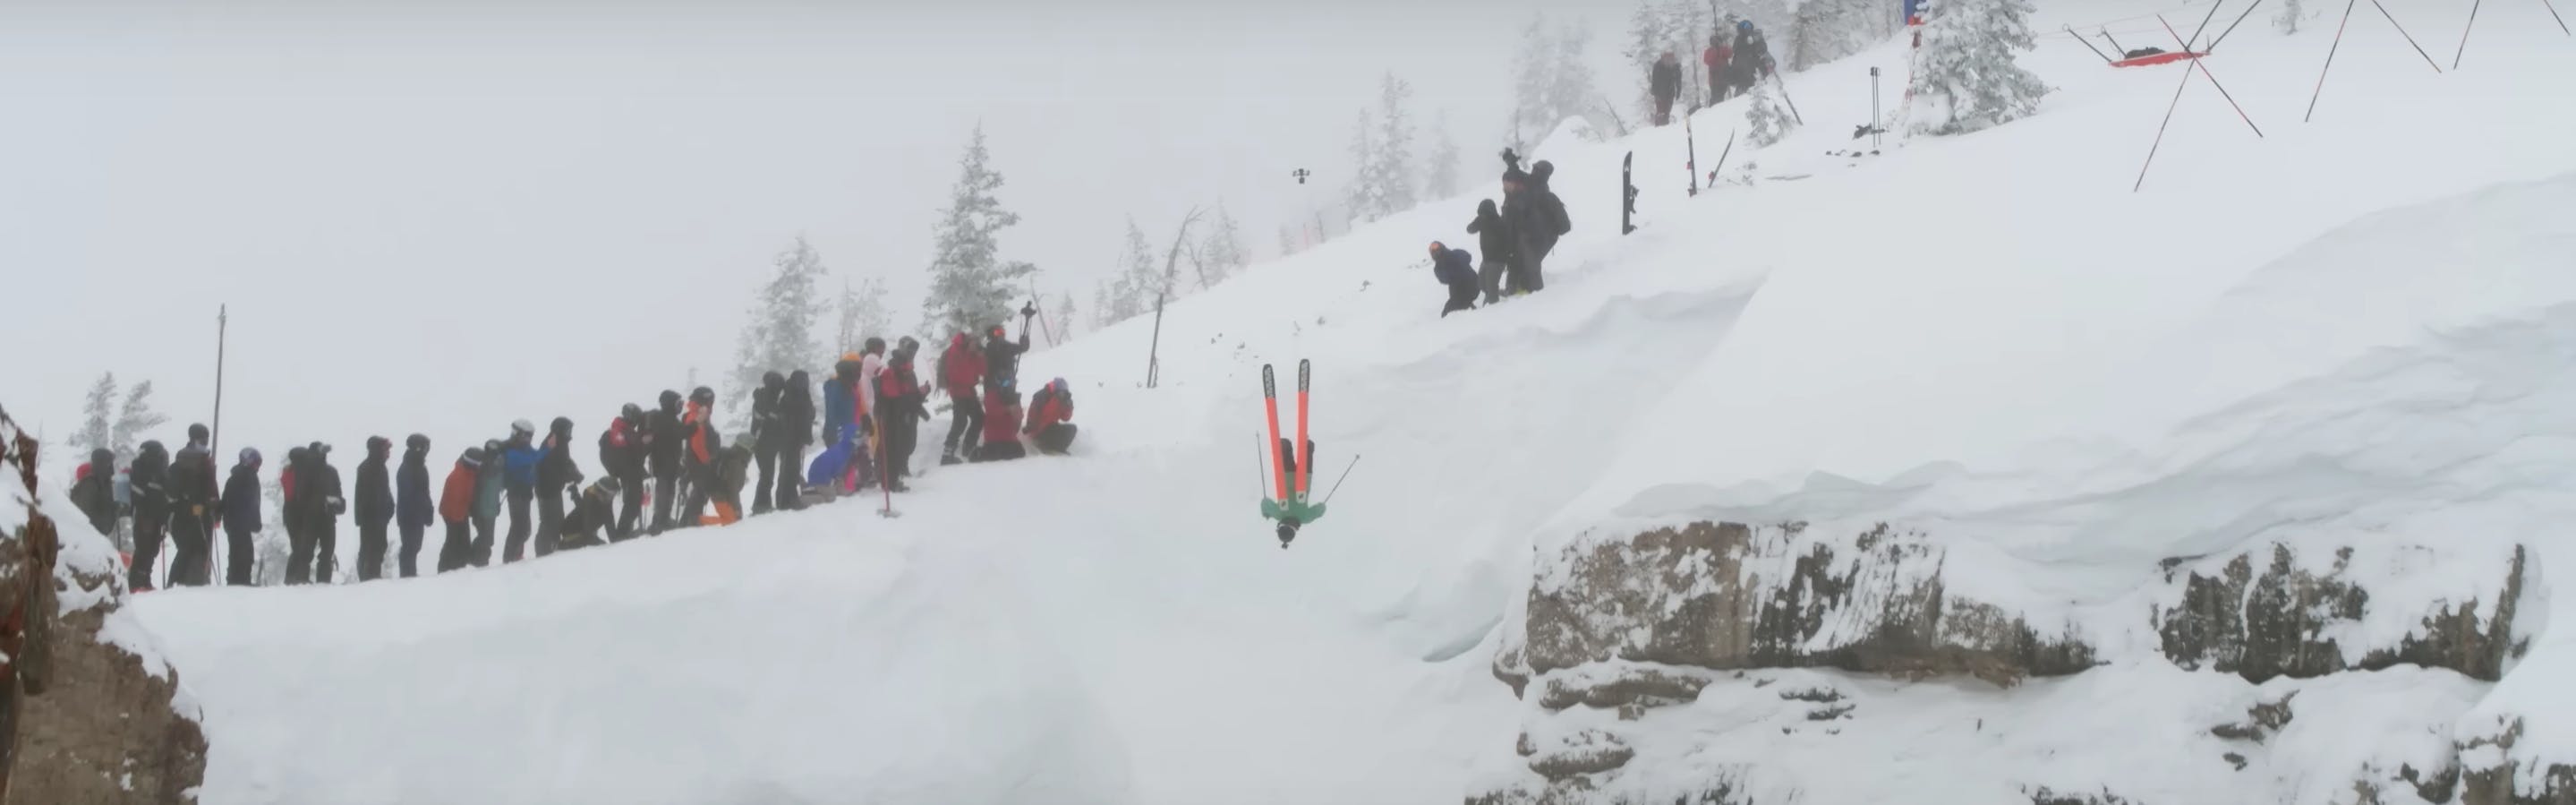 A skier drops into Corbet's coulier upside down for Kings and Queens of Corbet's. Photo comes from screenshot of Jackson Hole Mountain Resort's YouTube video "KINGS & QUEENS: MIND-BLOWING MOMENTS."